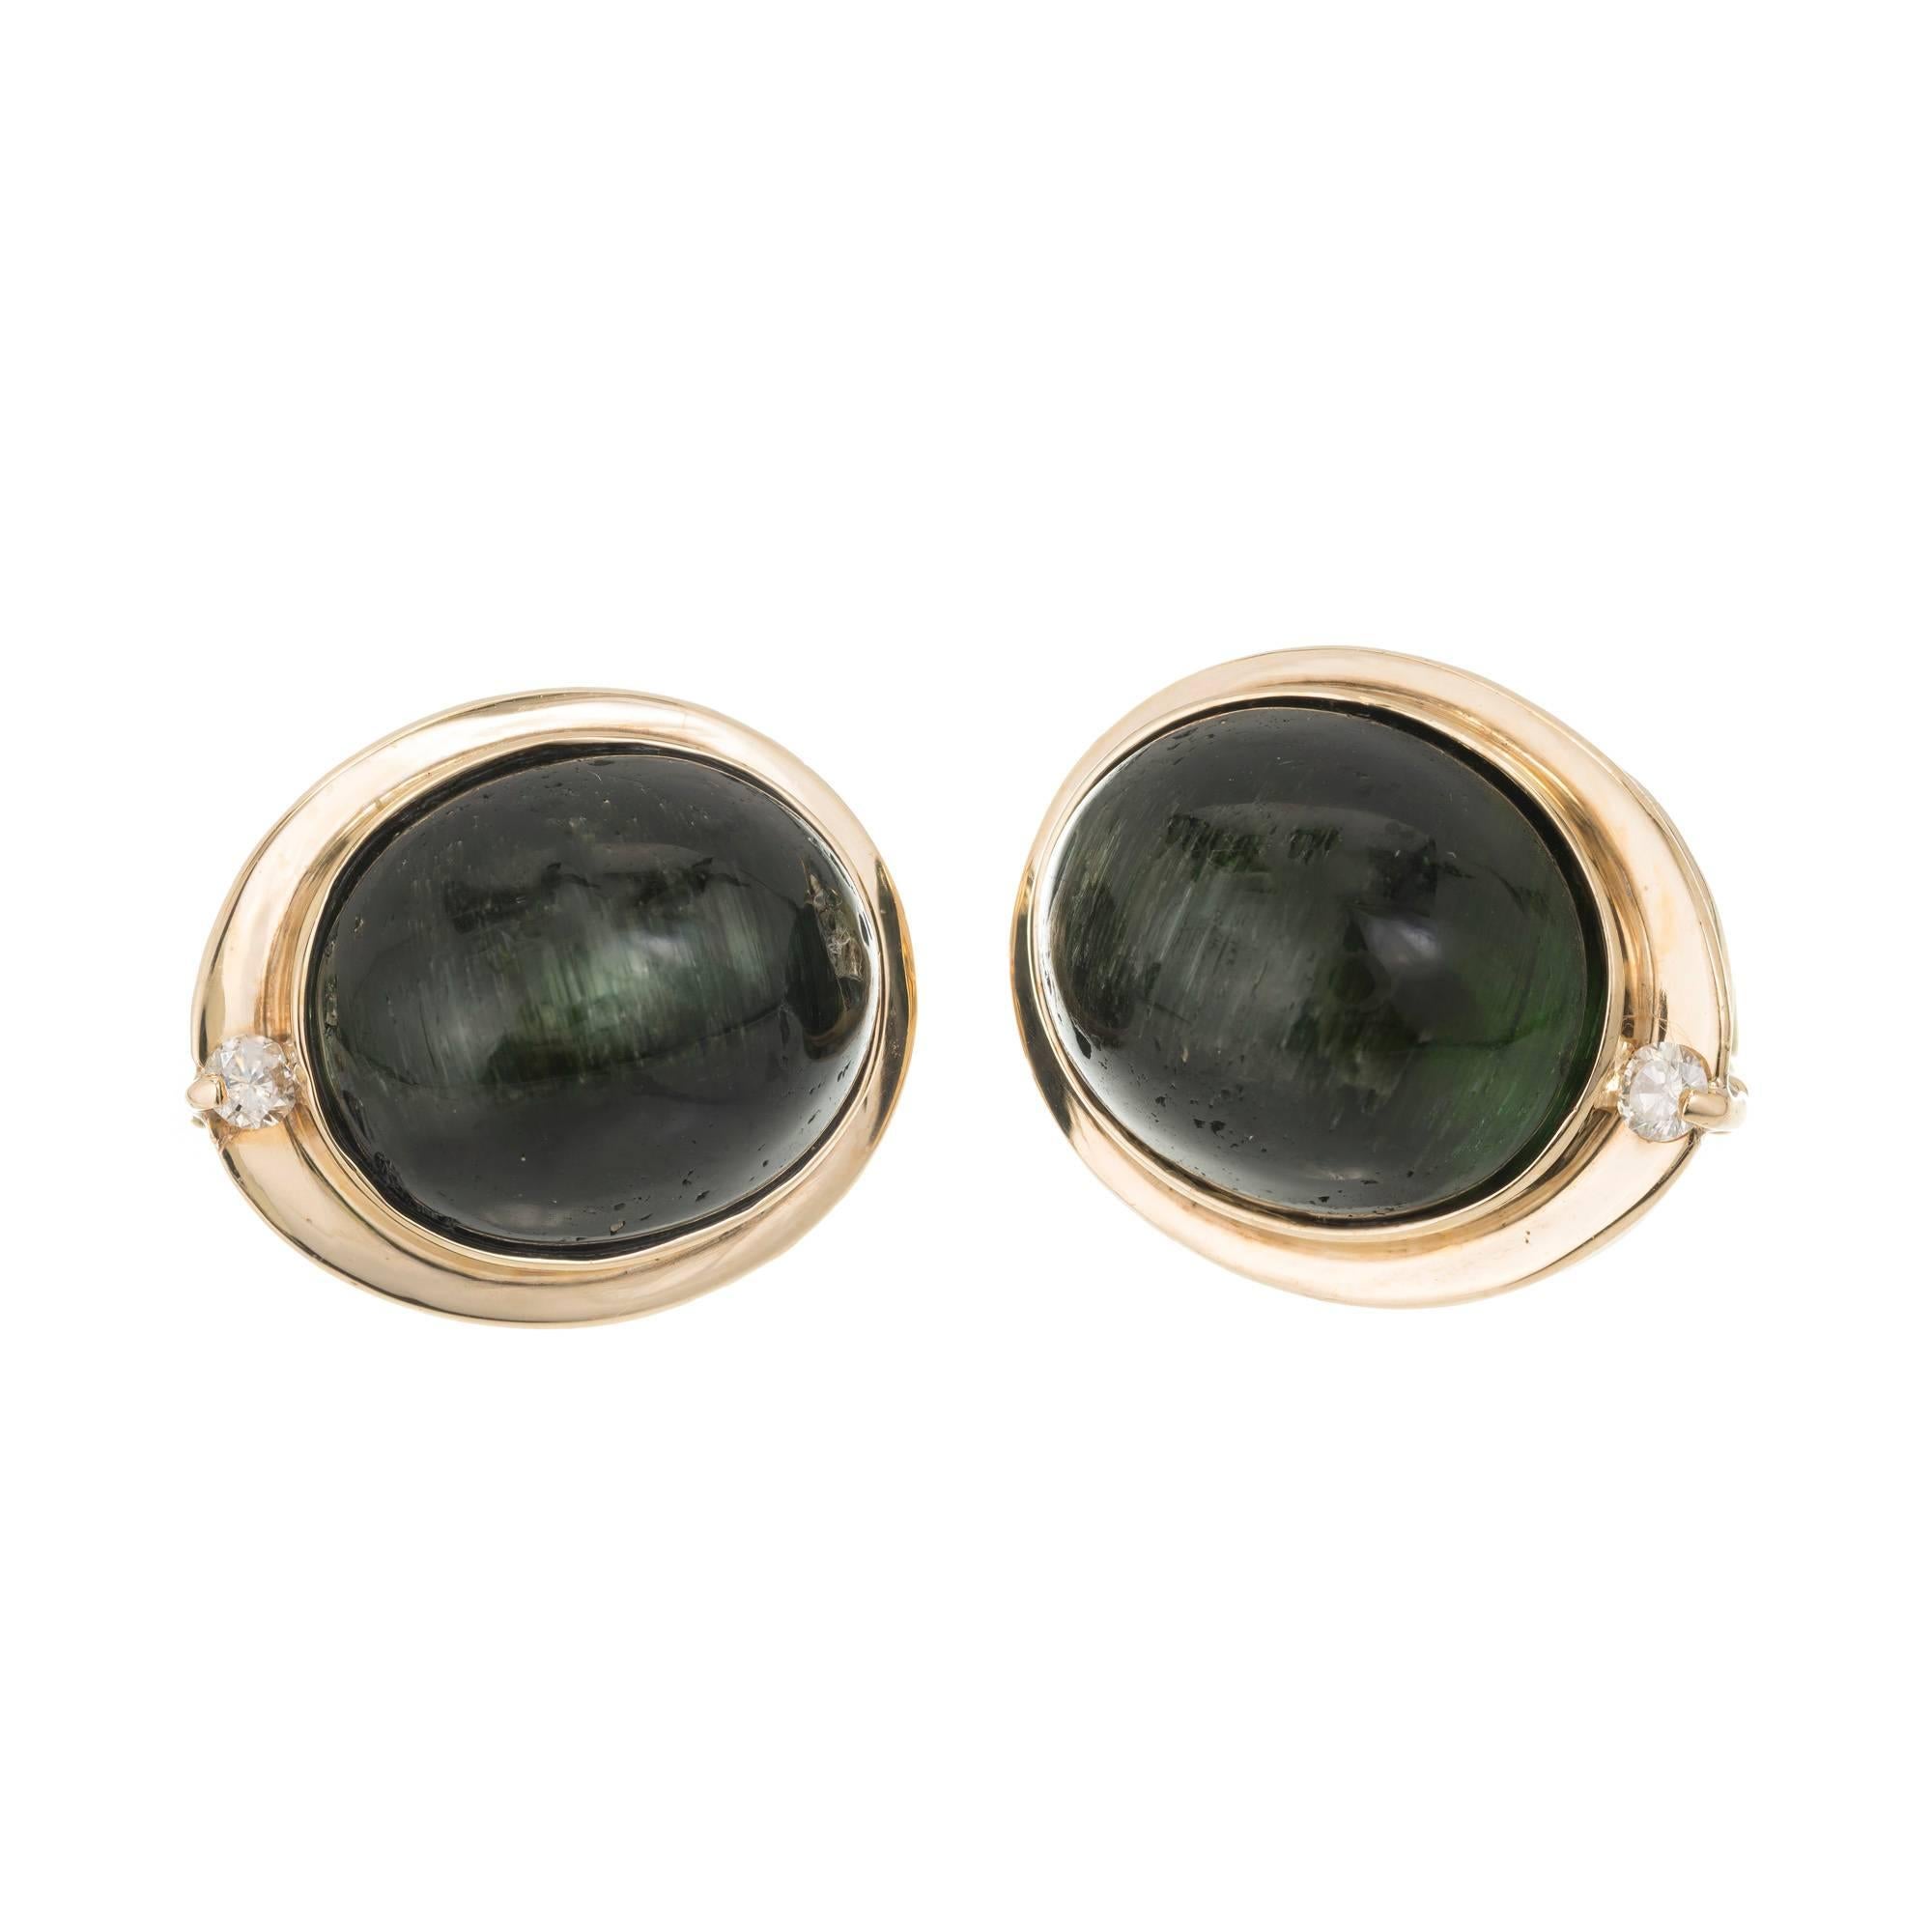 Natural untreated green cats eye Tourmaline 14k yellow gold diamond clip post earrings

Two full cut diamonds, approx. total weight .06cts, G, VS2. AGL certificate # CS49501AB
Two matched natural untreated no heat no enhancements 14 x 11mm dark